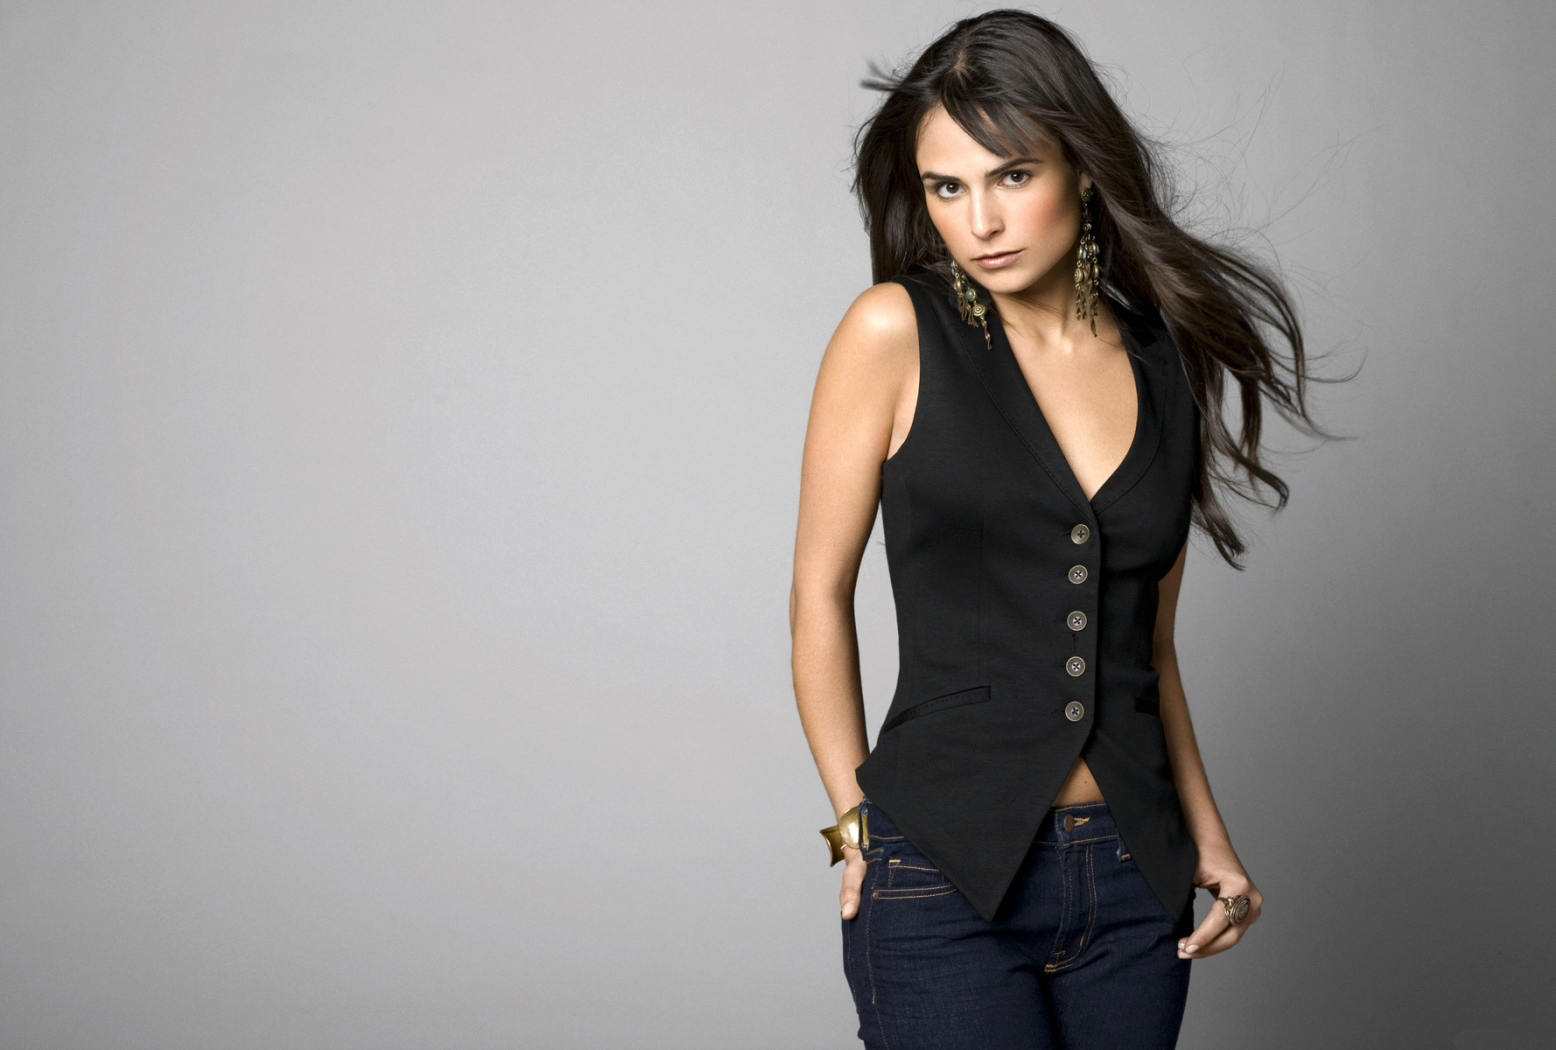 Jordana Brewster Hot Images | The Wallpapers World